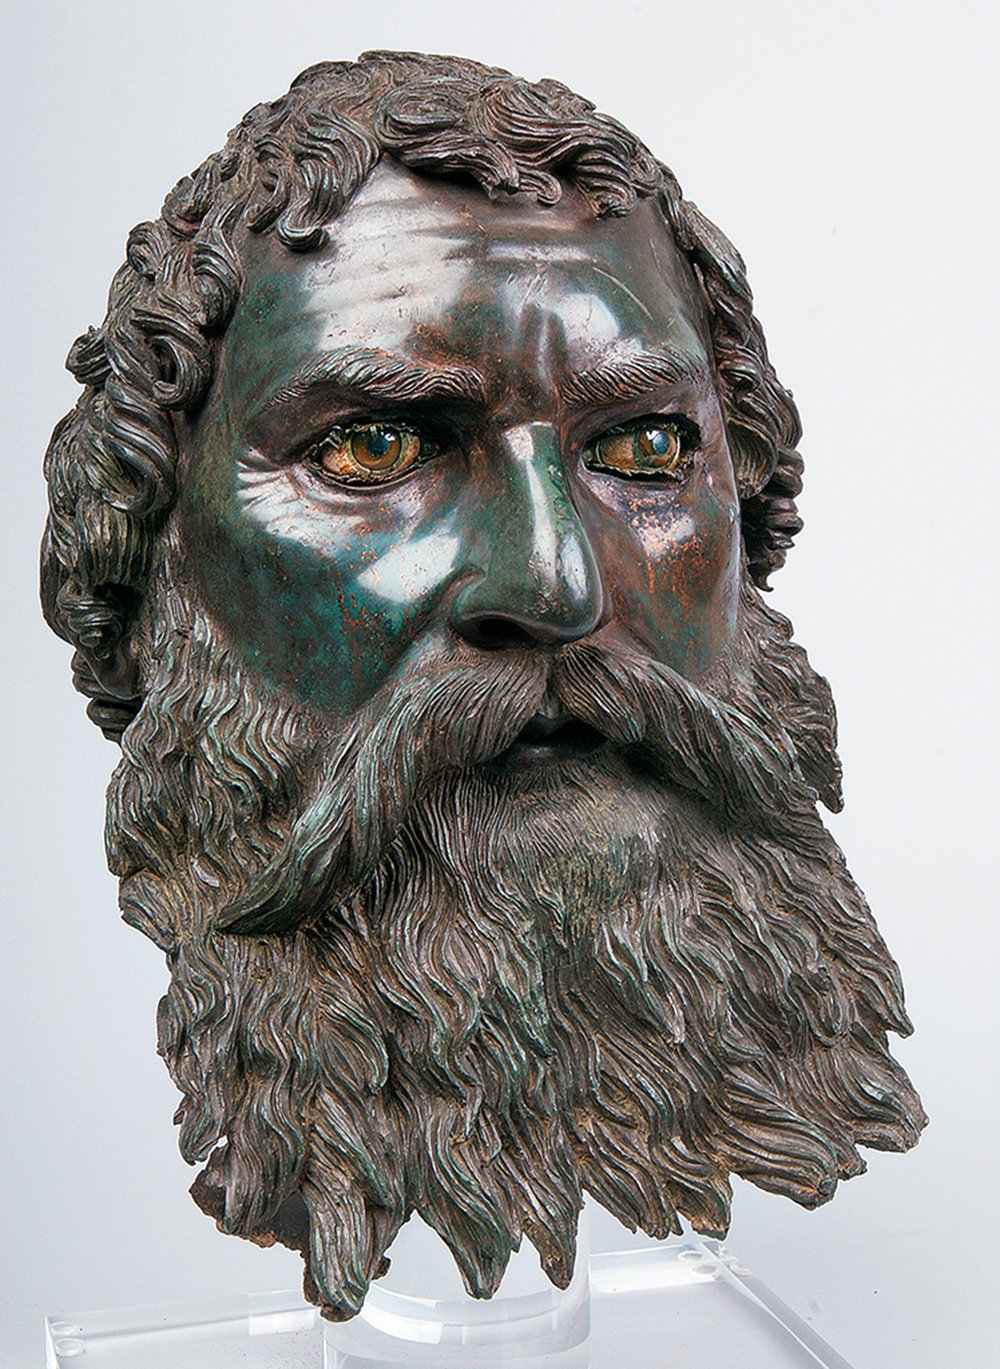 Bronze portrait bust of Seuthes III from around 310-300 BC. The detailed sculpture showcases a powerful visage with intense, inlaid eyes, a pronounced nose, and a richly textured beard and curly hair. The patina of the bronze exhibits shades of green and brown, indicating its age and preservation.